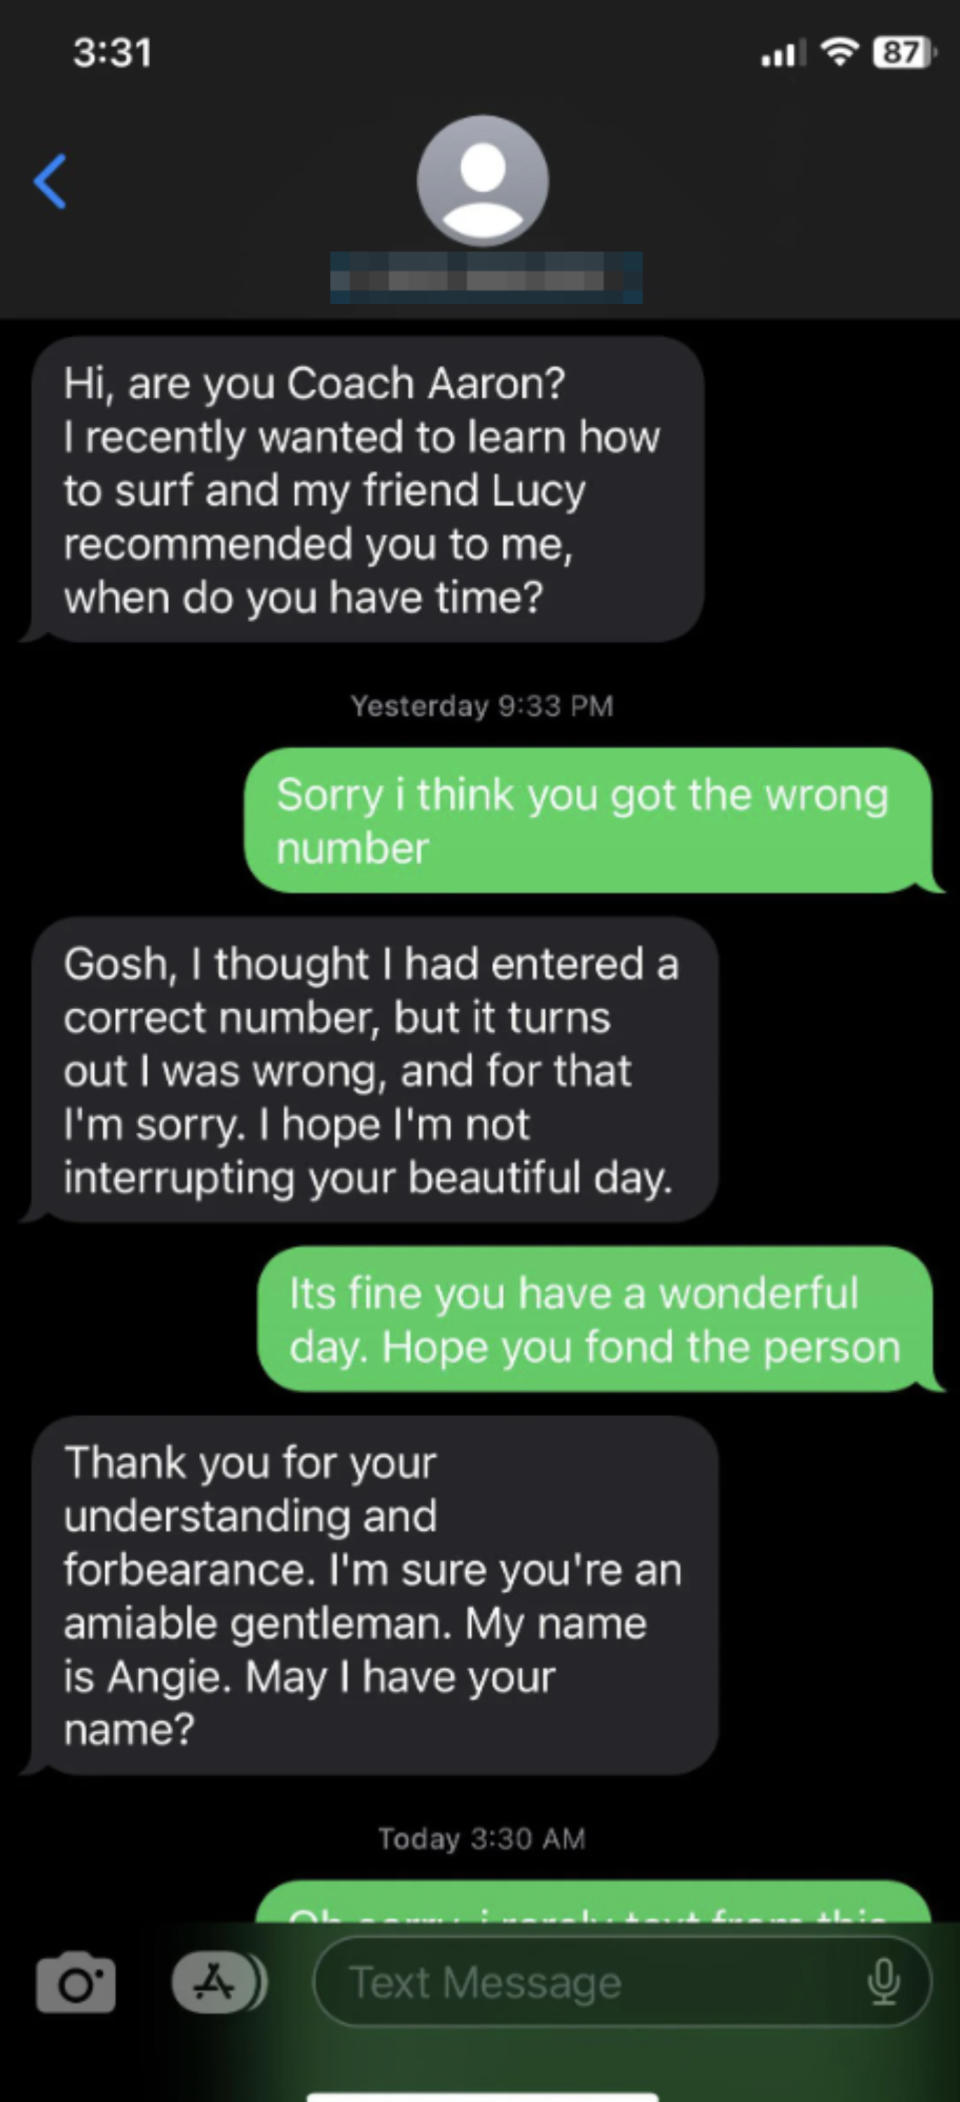 Text messages on a phone screen showing a polite conversation about a wrong number with someone named Aaron